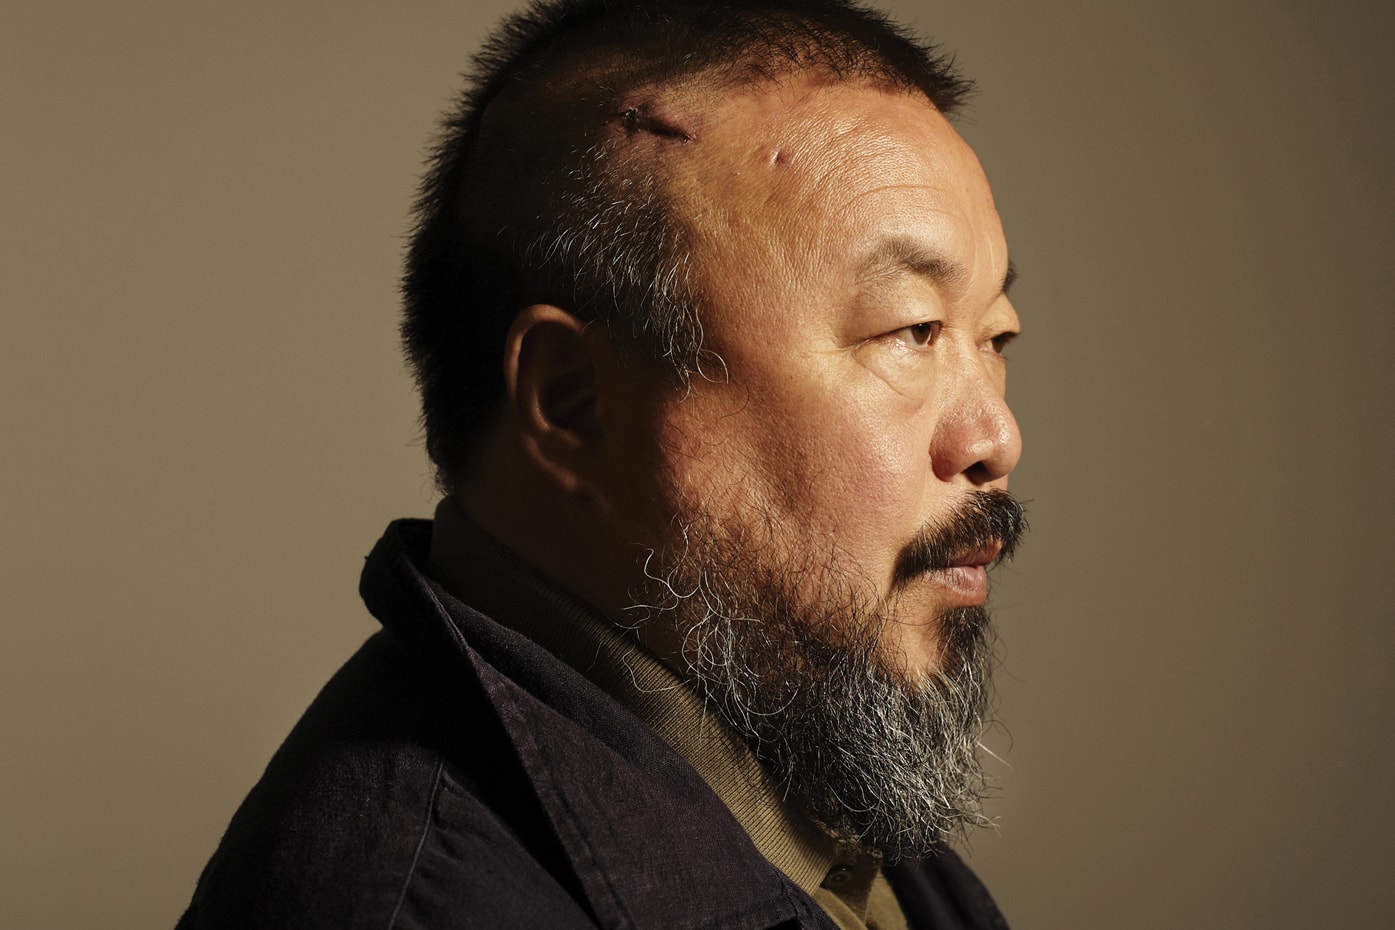 Ai Weiwei Shouting Out Audio Project 2008 Wenchuan Earthquake Victims